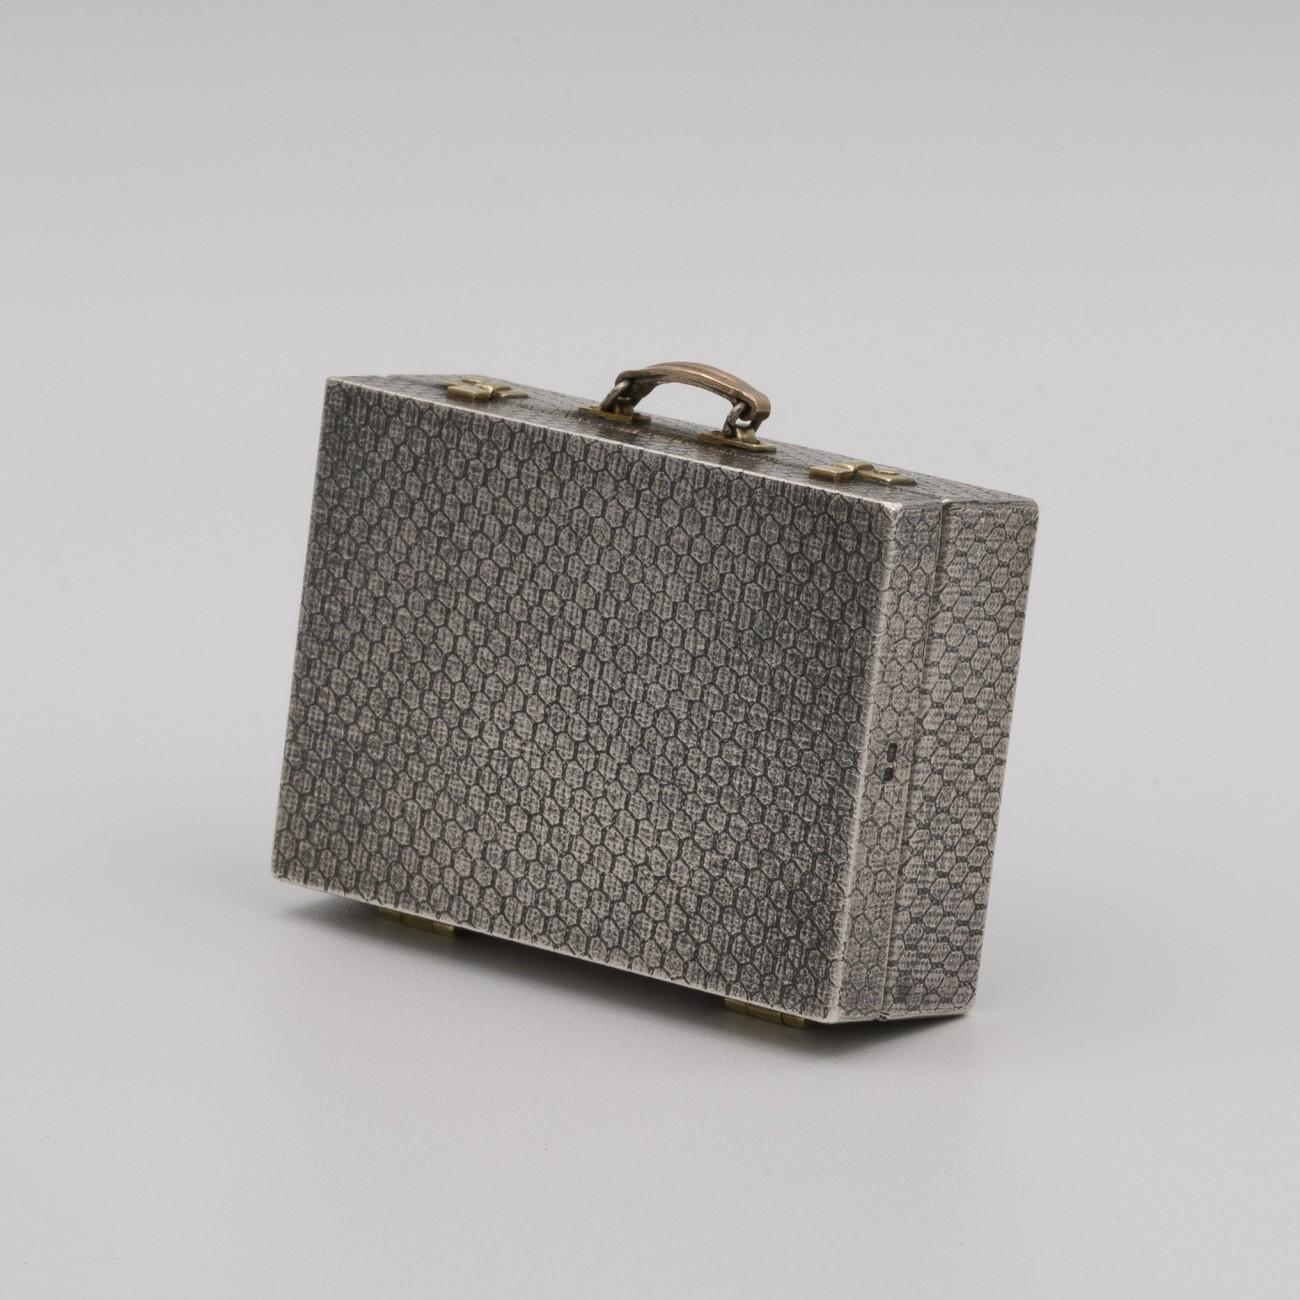 A fantastic miniature sterling silver and gold suitcase by renowned jeweler and miniaturist Karel Bartosik, hallmarked London 1983. Incredible detail; It has a snakeskin decorative finish to the outside of the case, hinges and mock catches made of